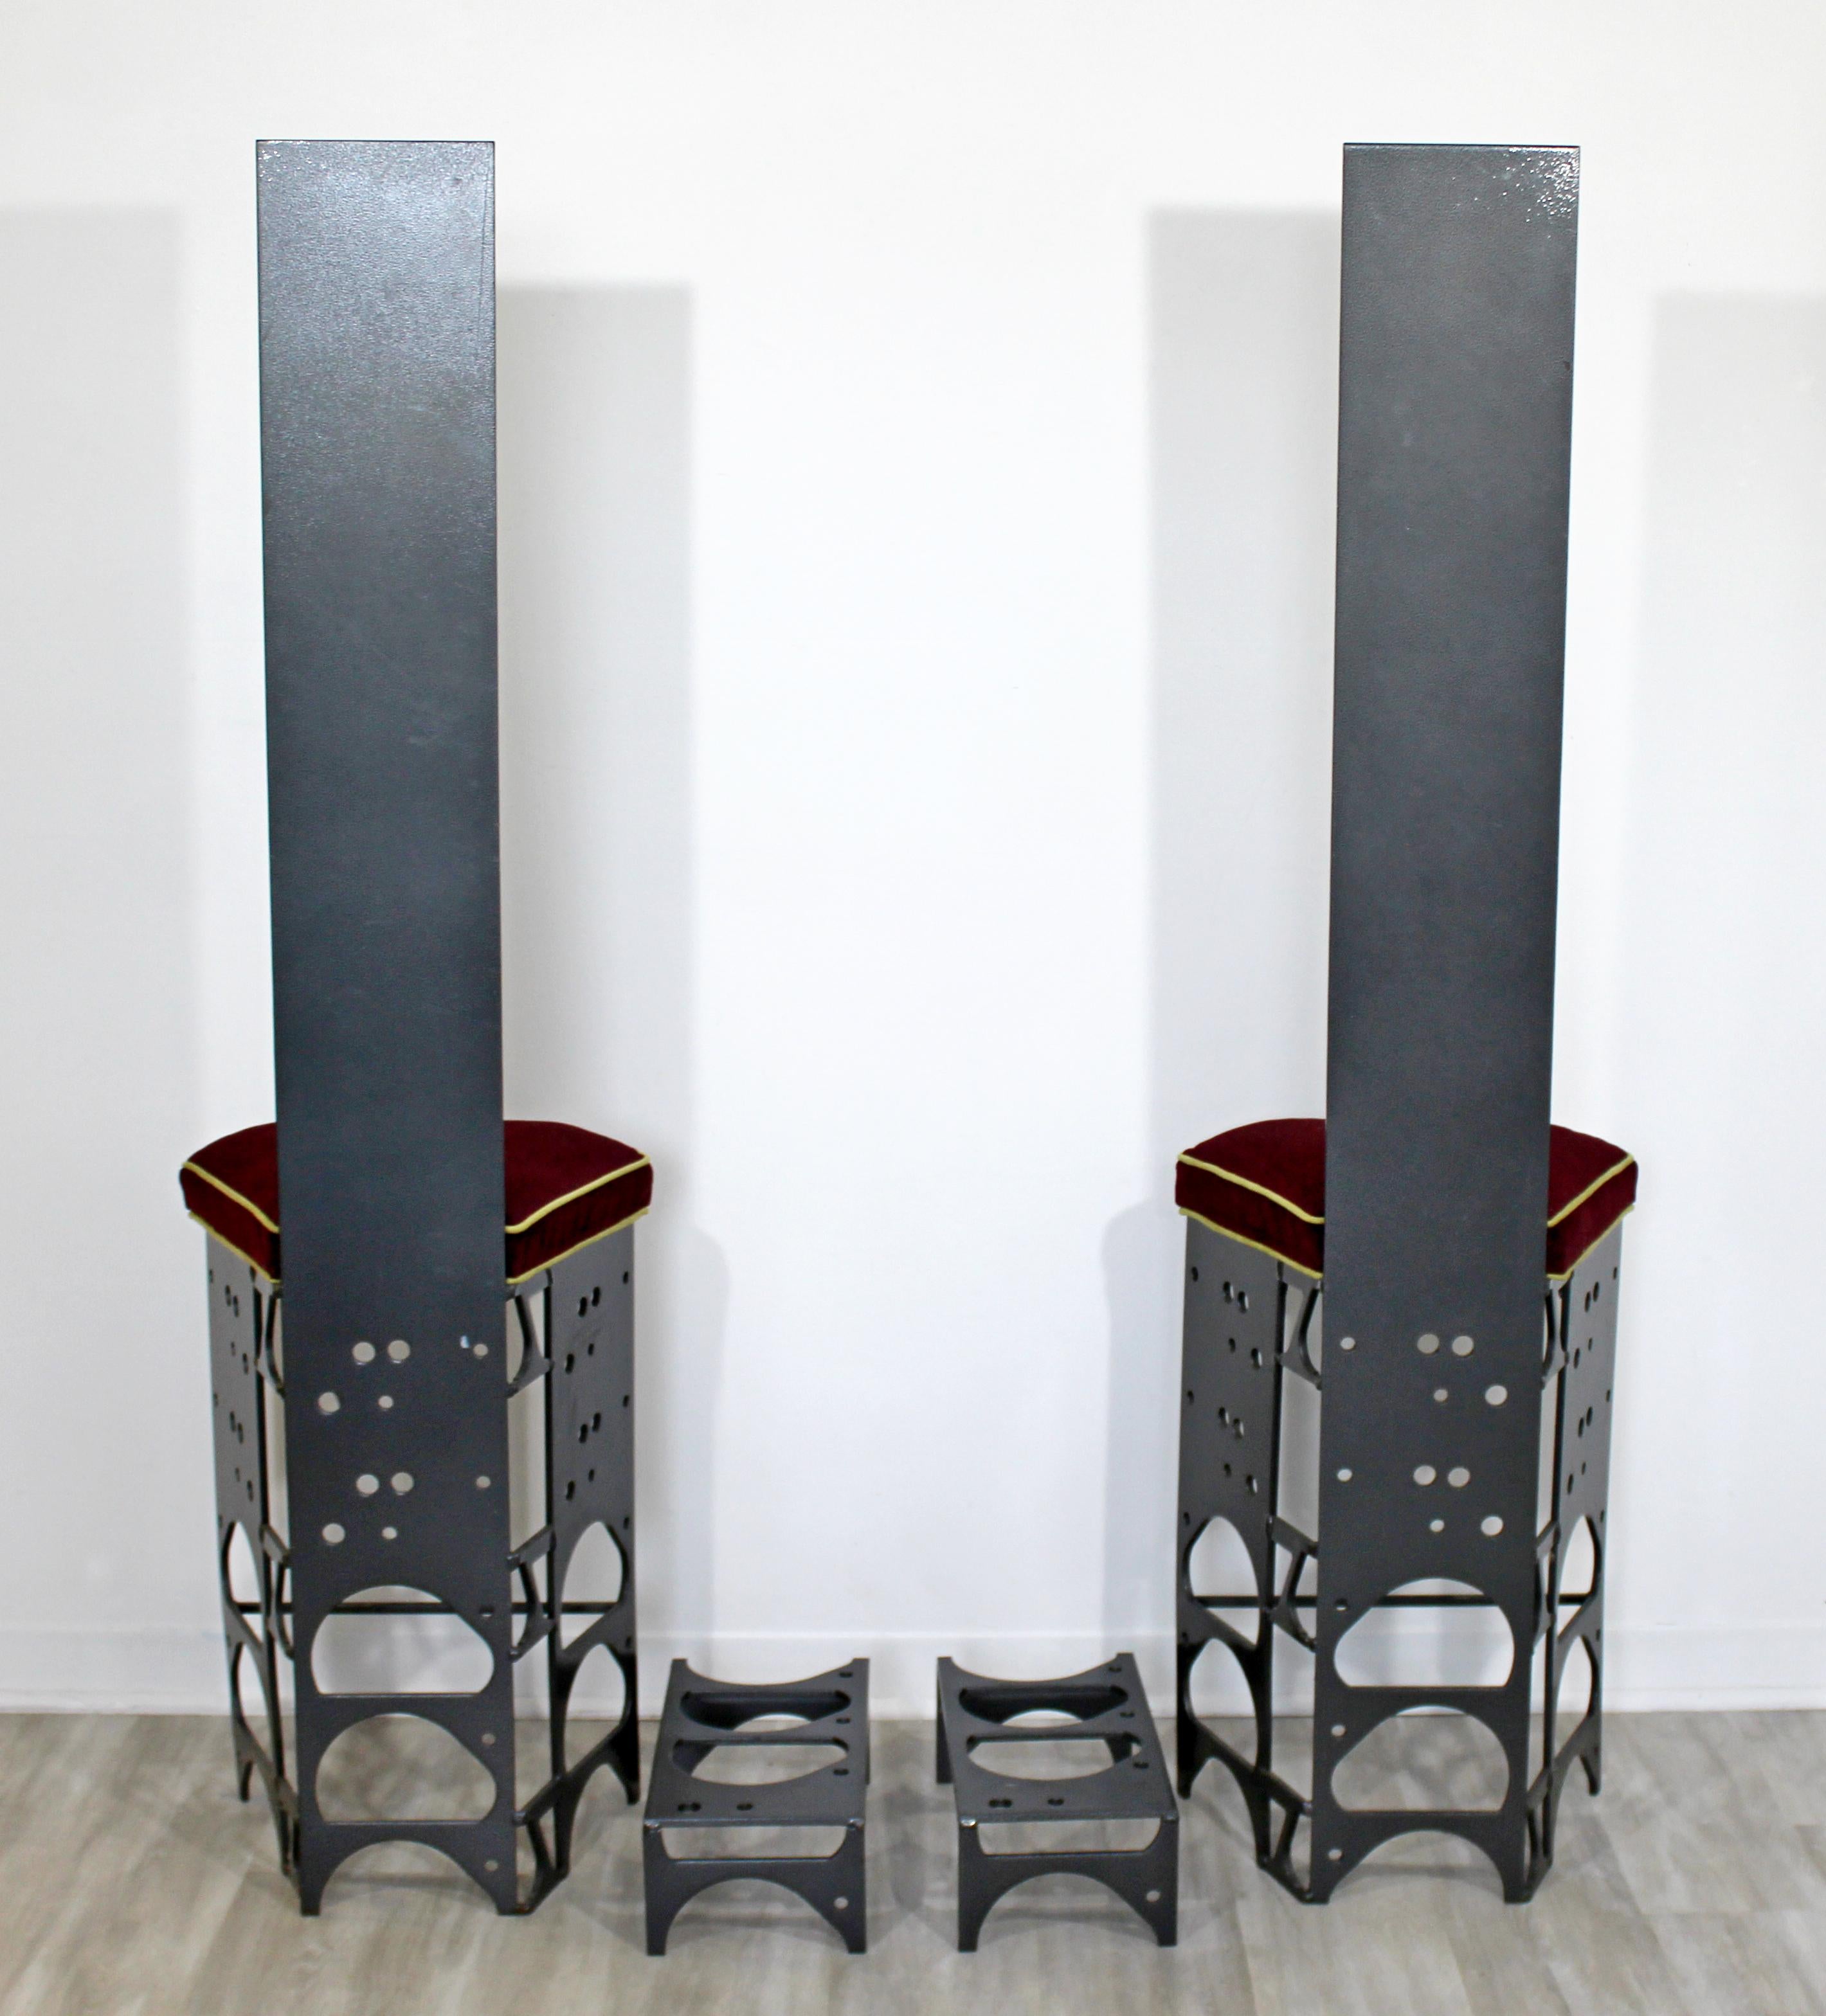 Contemporary Modern Ironsworks King and Queen Pair of Iron Art Chairs & Ottomans 1